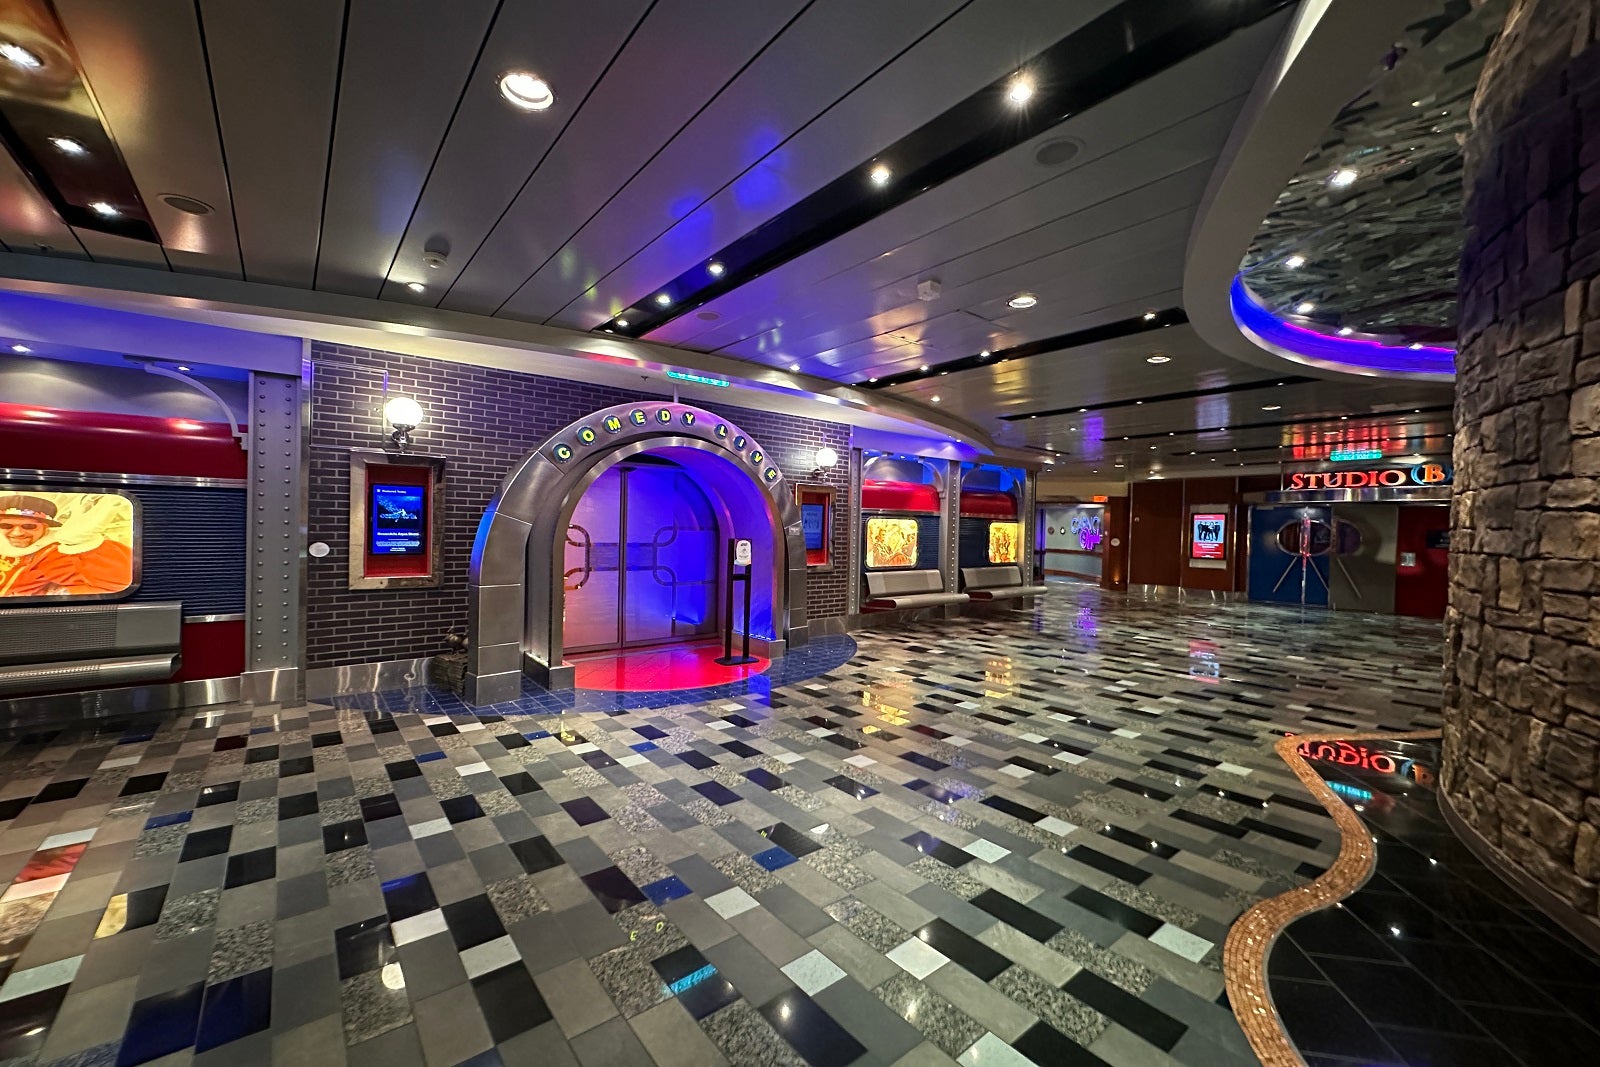 cruise critic reviews allure of the seas